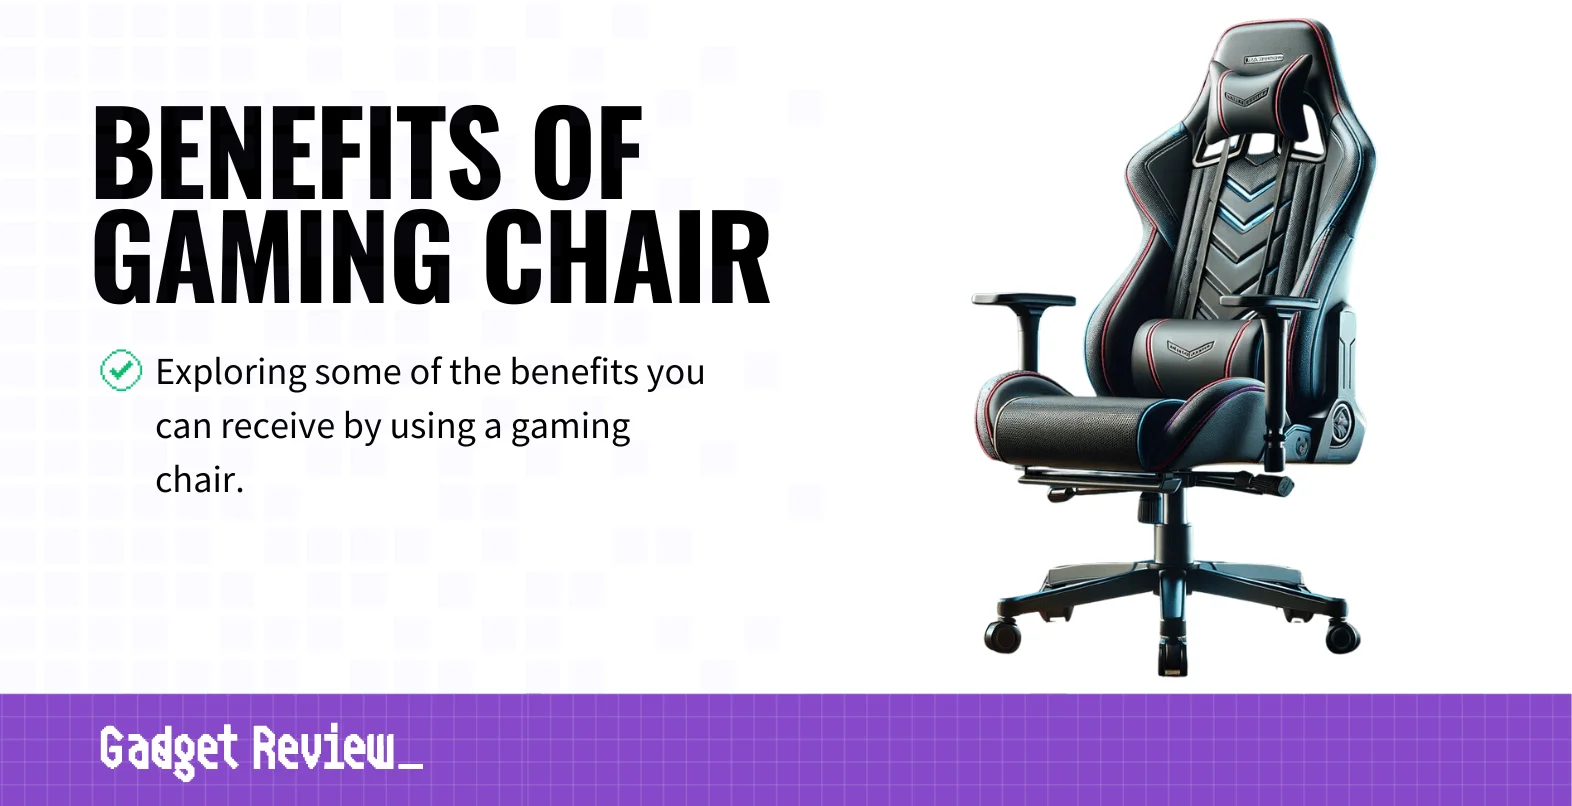 What Are Benefits of Gaming Chair